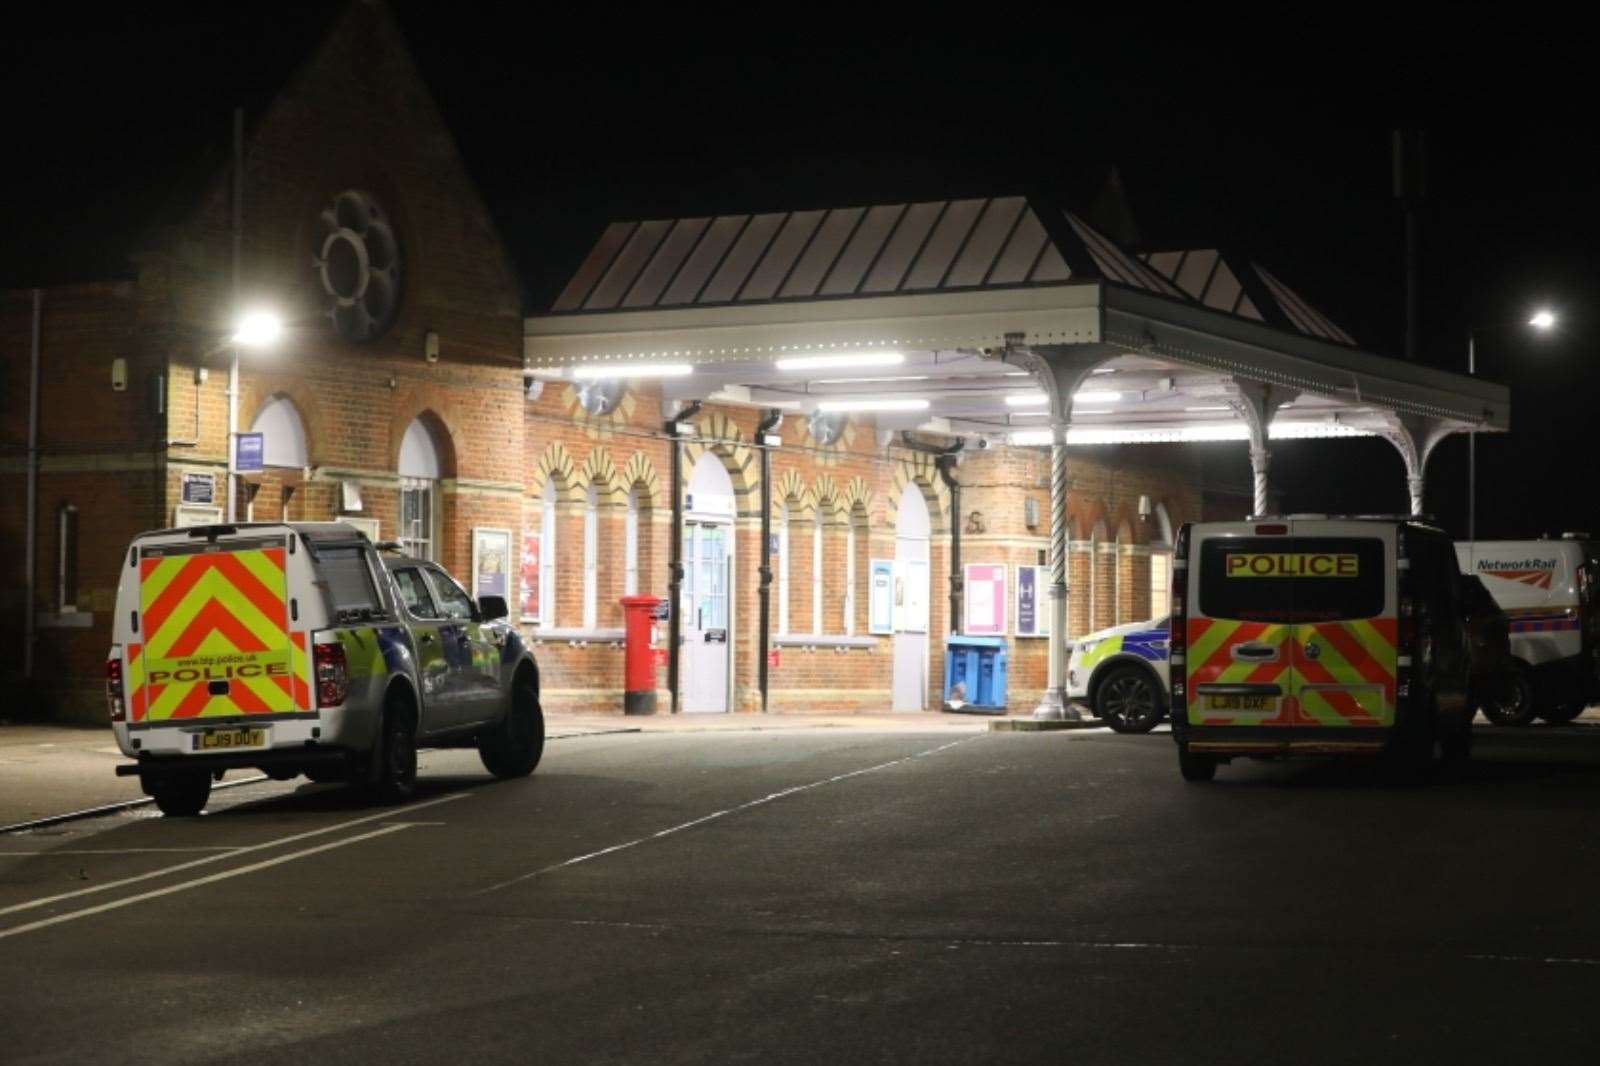 Emergency services at Herne Bay station on Wednesday night. Picture: UKNIP